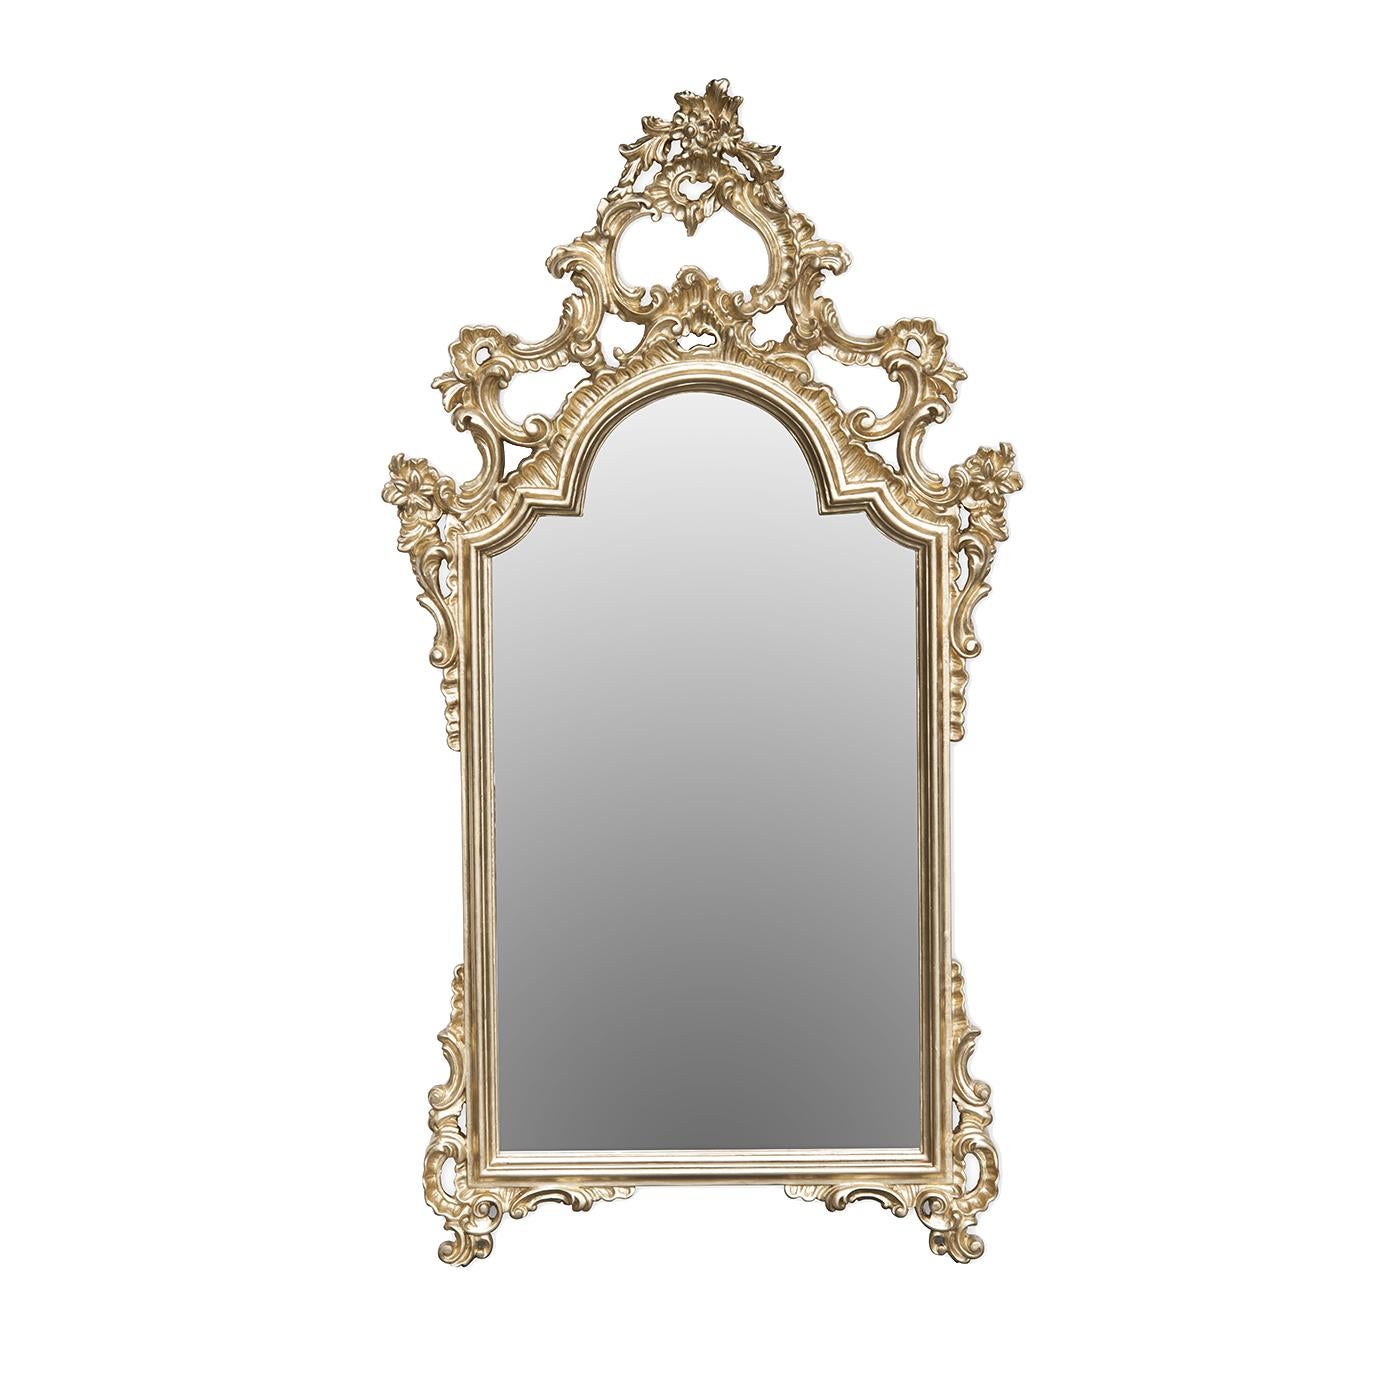 This magnificent mirror is a spectacular example of exquisite craftsmanship and classic design. The simple rectangle of the mirror with a scalloped top is adorned with a wooden frame enriched with sinuous decorations carved by hand that become a